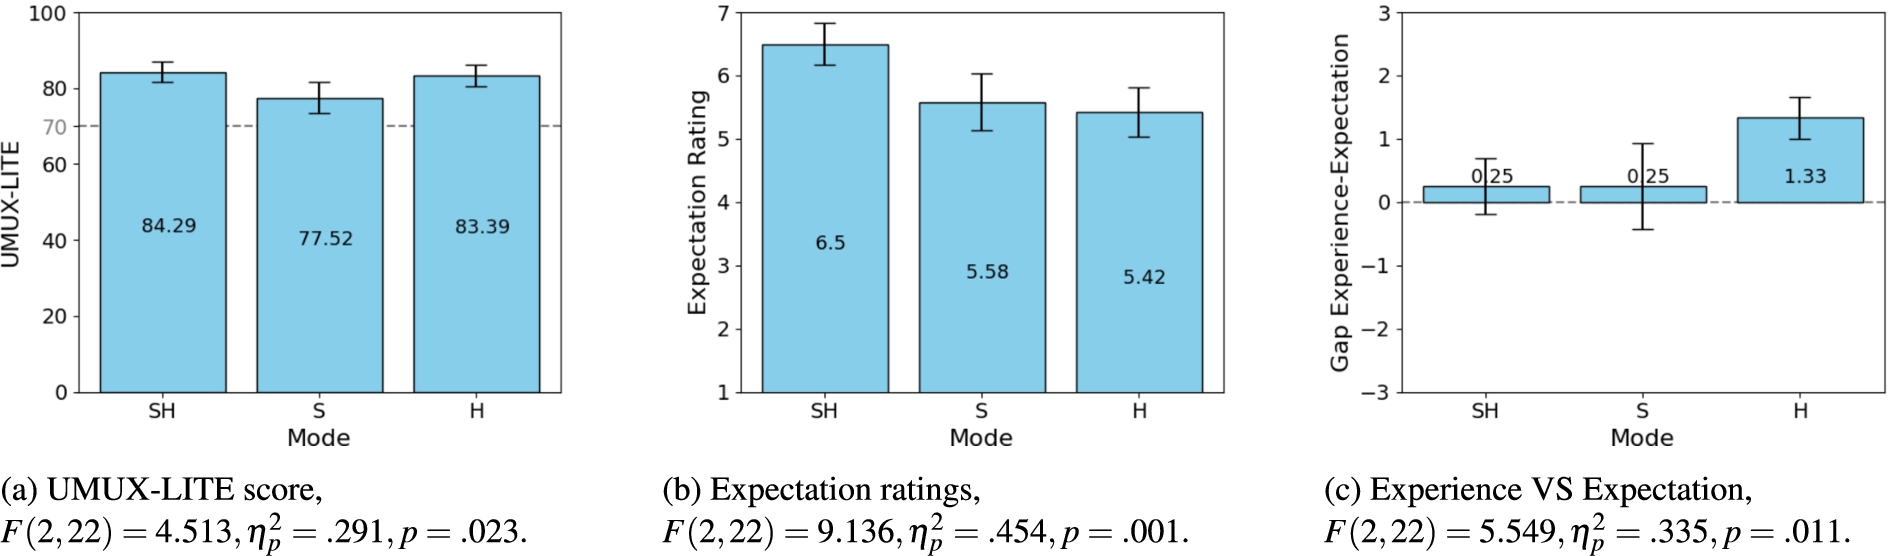 Estimated marginal means of the three dependent variables – (a) UMUX-LITE score, (b) expectation ratings, and (c) gap between experience and expectation ratings – for the three modes SH, S, and H with error bars for 95% confidence intervals. The follow-up study shows that all of the dependent variables differed across the three modes.